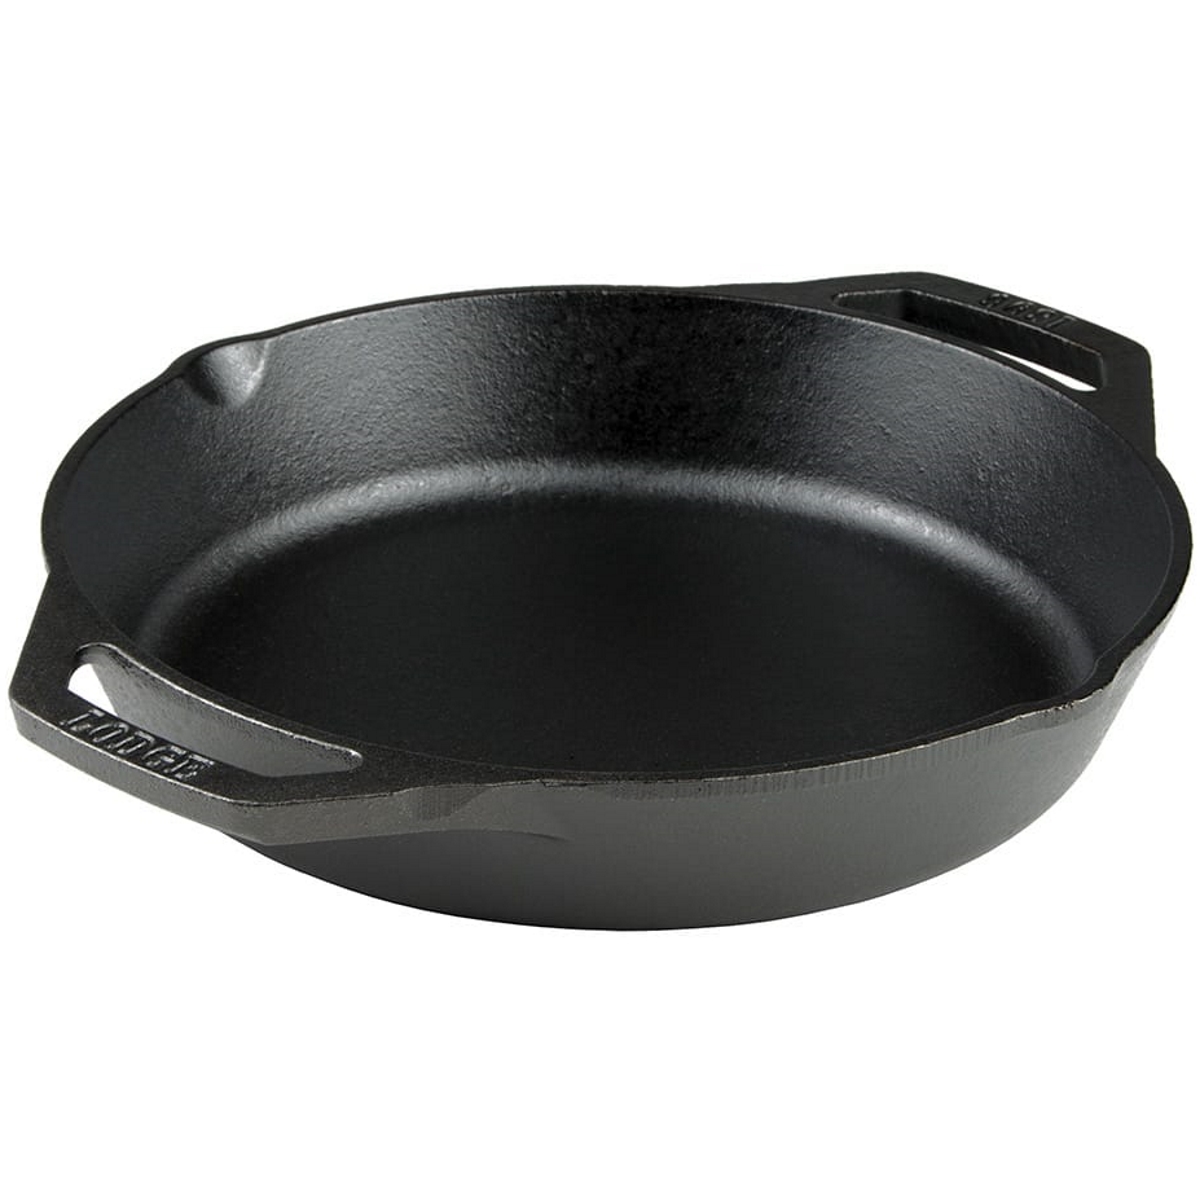 Lodge Cast Iron Muffin Pan - 6 Cups